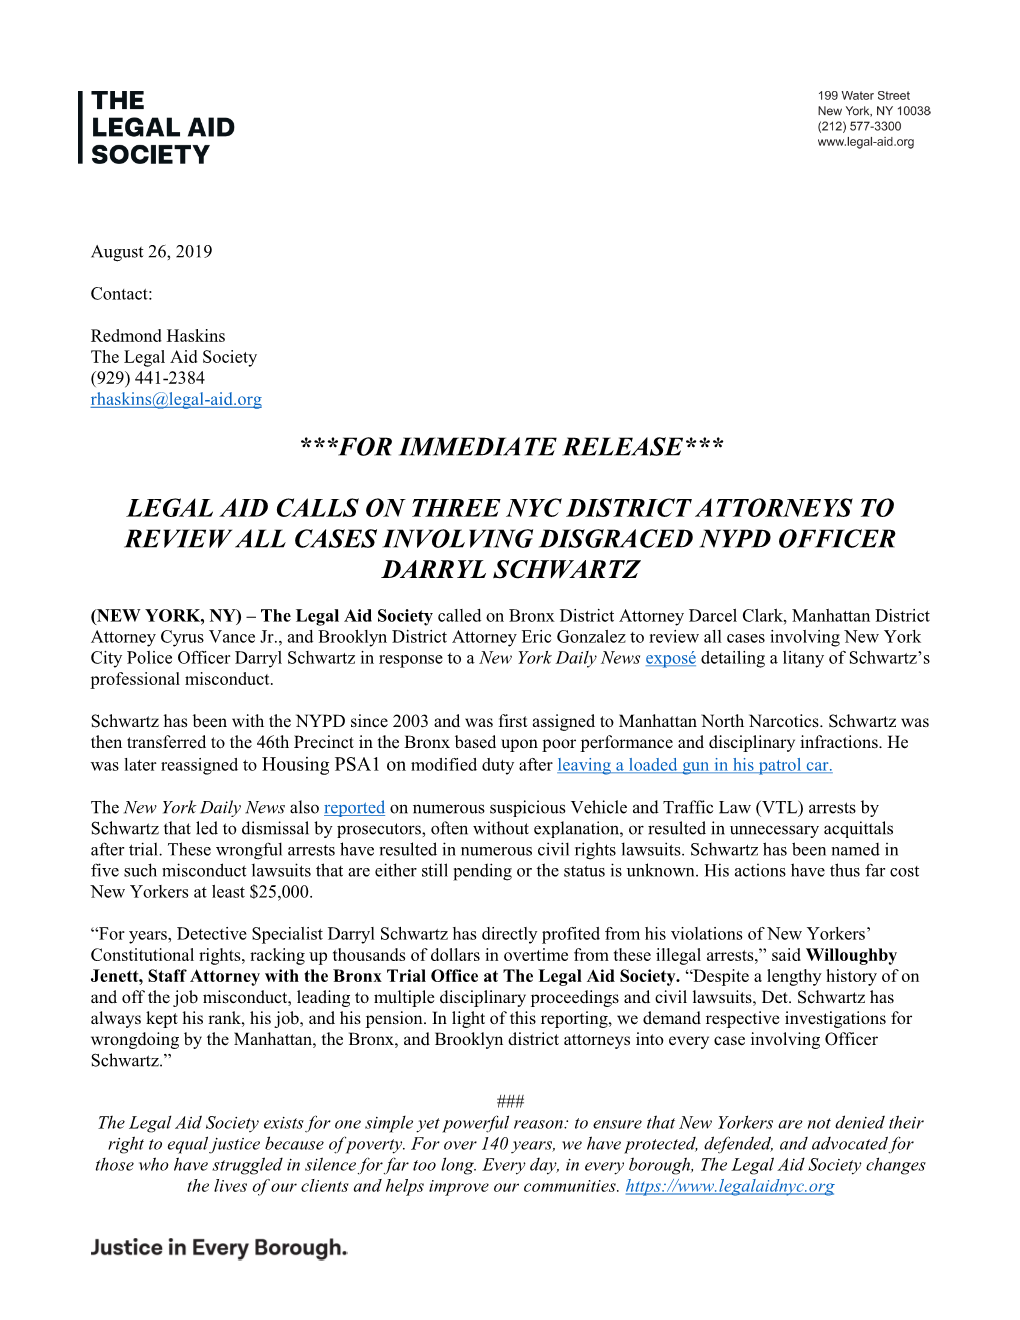 For Immediate Release*** Legal Aid Calls on Three Nyc